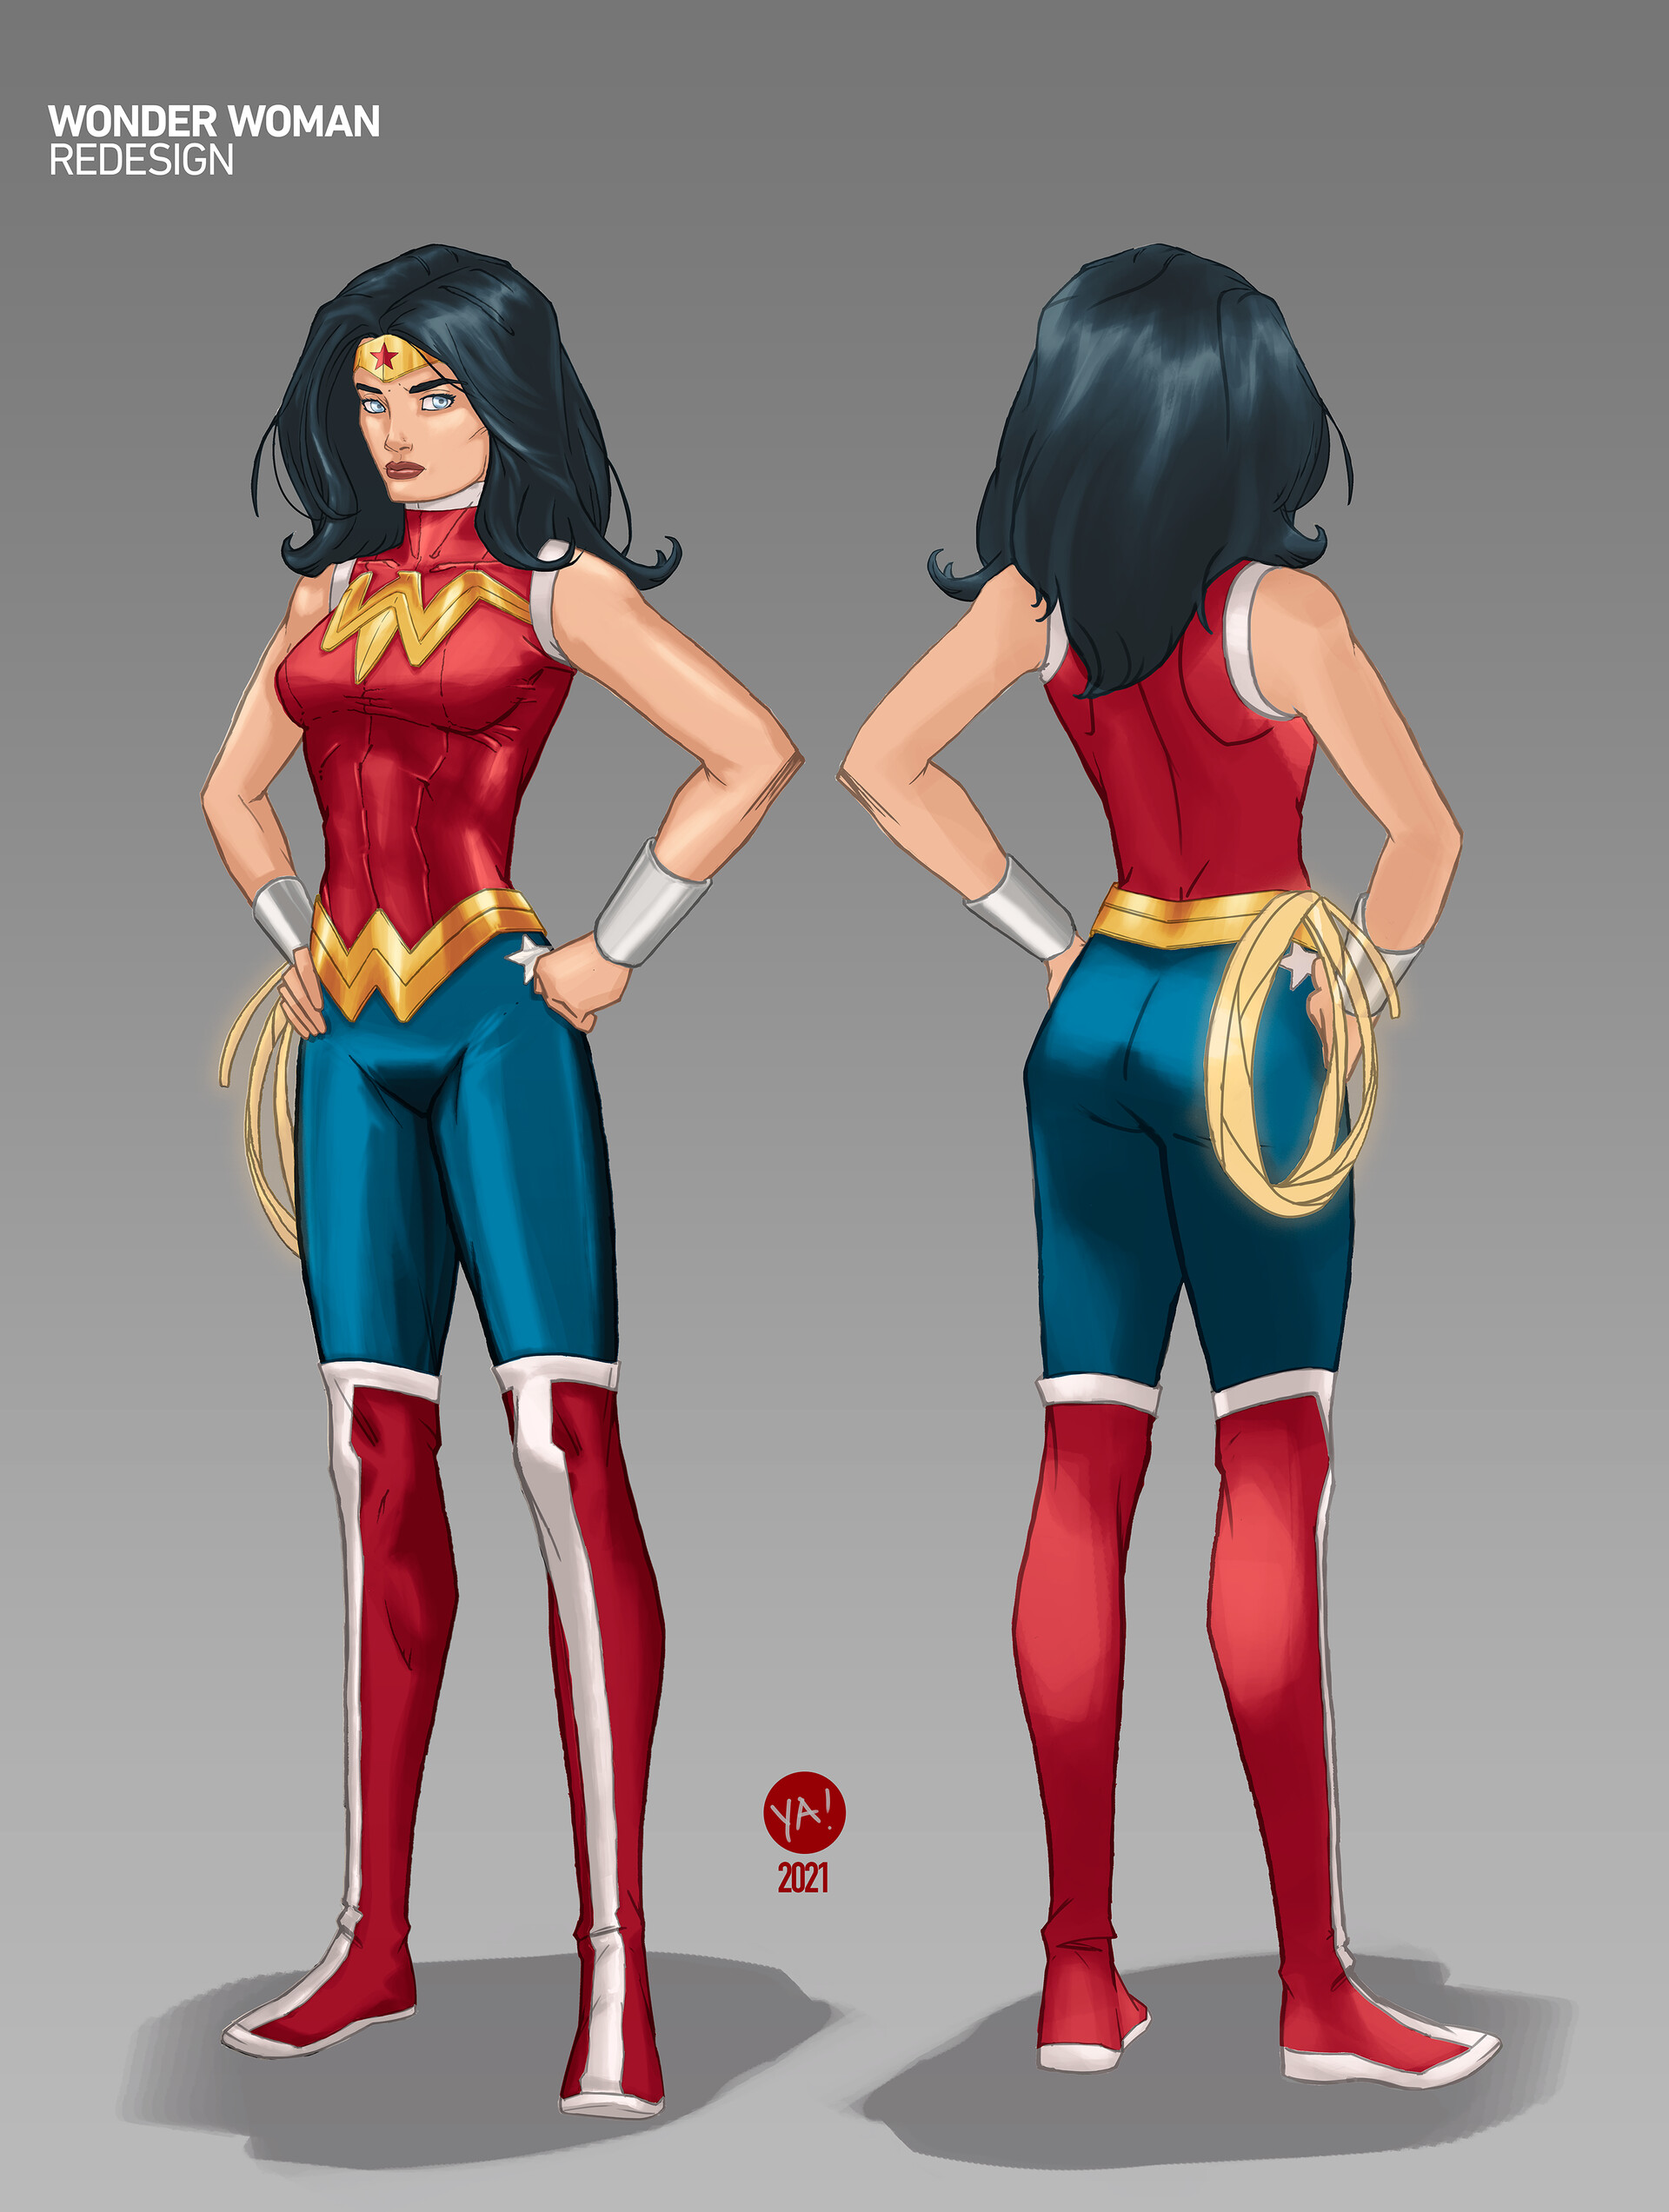 Simo A Wonder Woman Redesign 2023 Inal ?1685132778